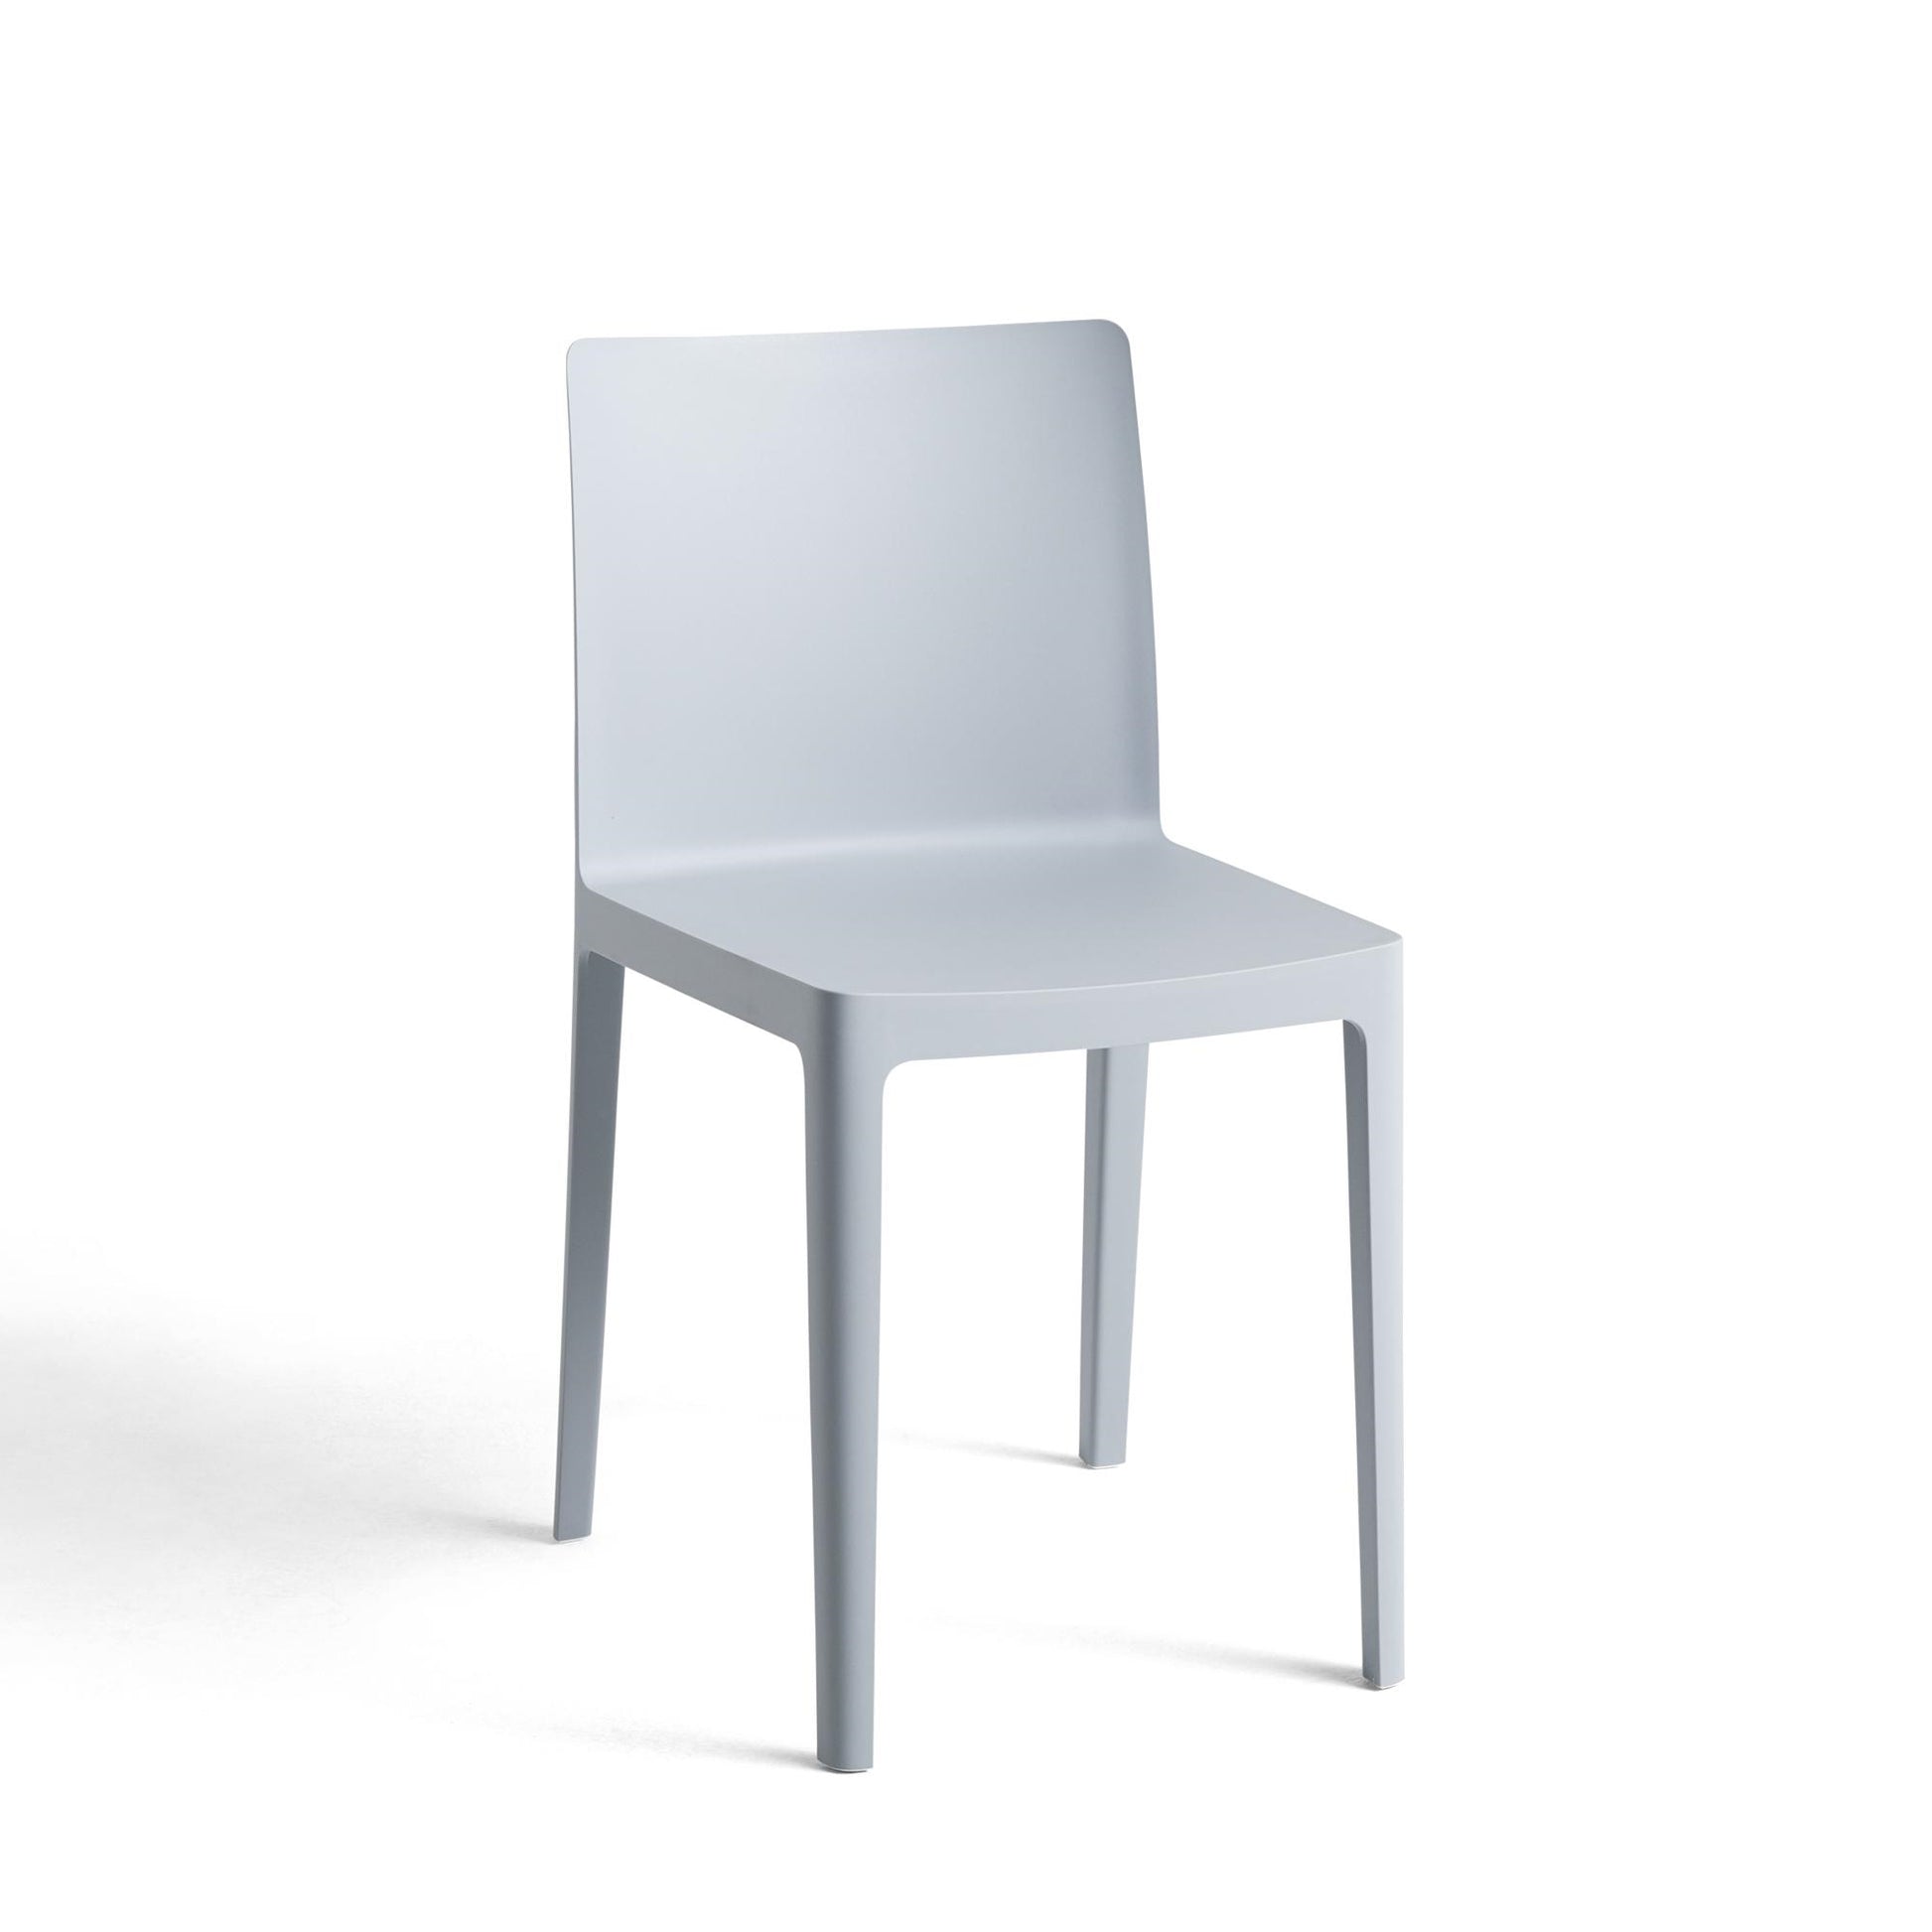 Élémentaire Chair by HAY #Blue-grey